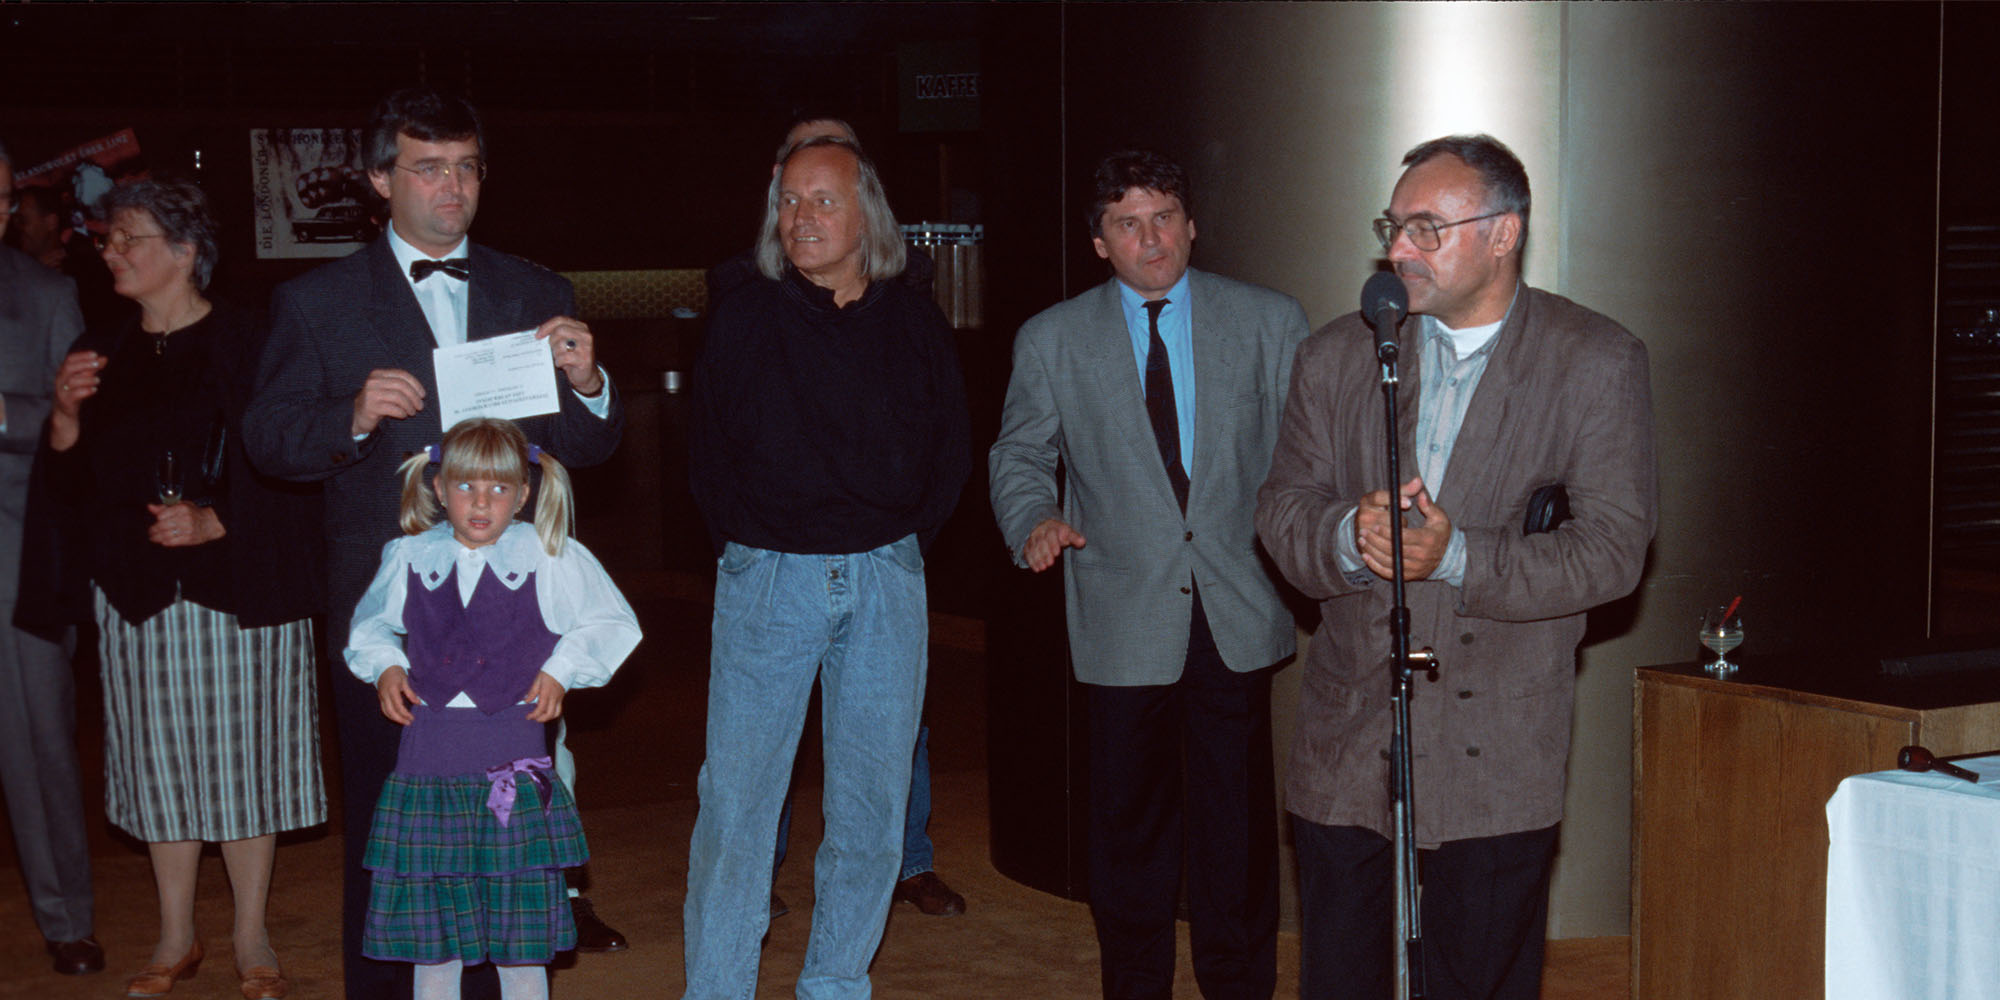 1989: Ars Electronica Opening, with Franz Dobusch and Hannes Leopoldseder